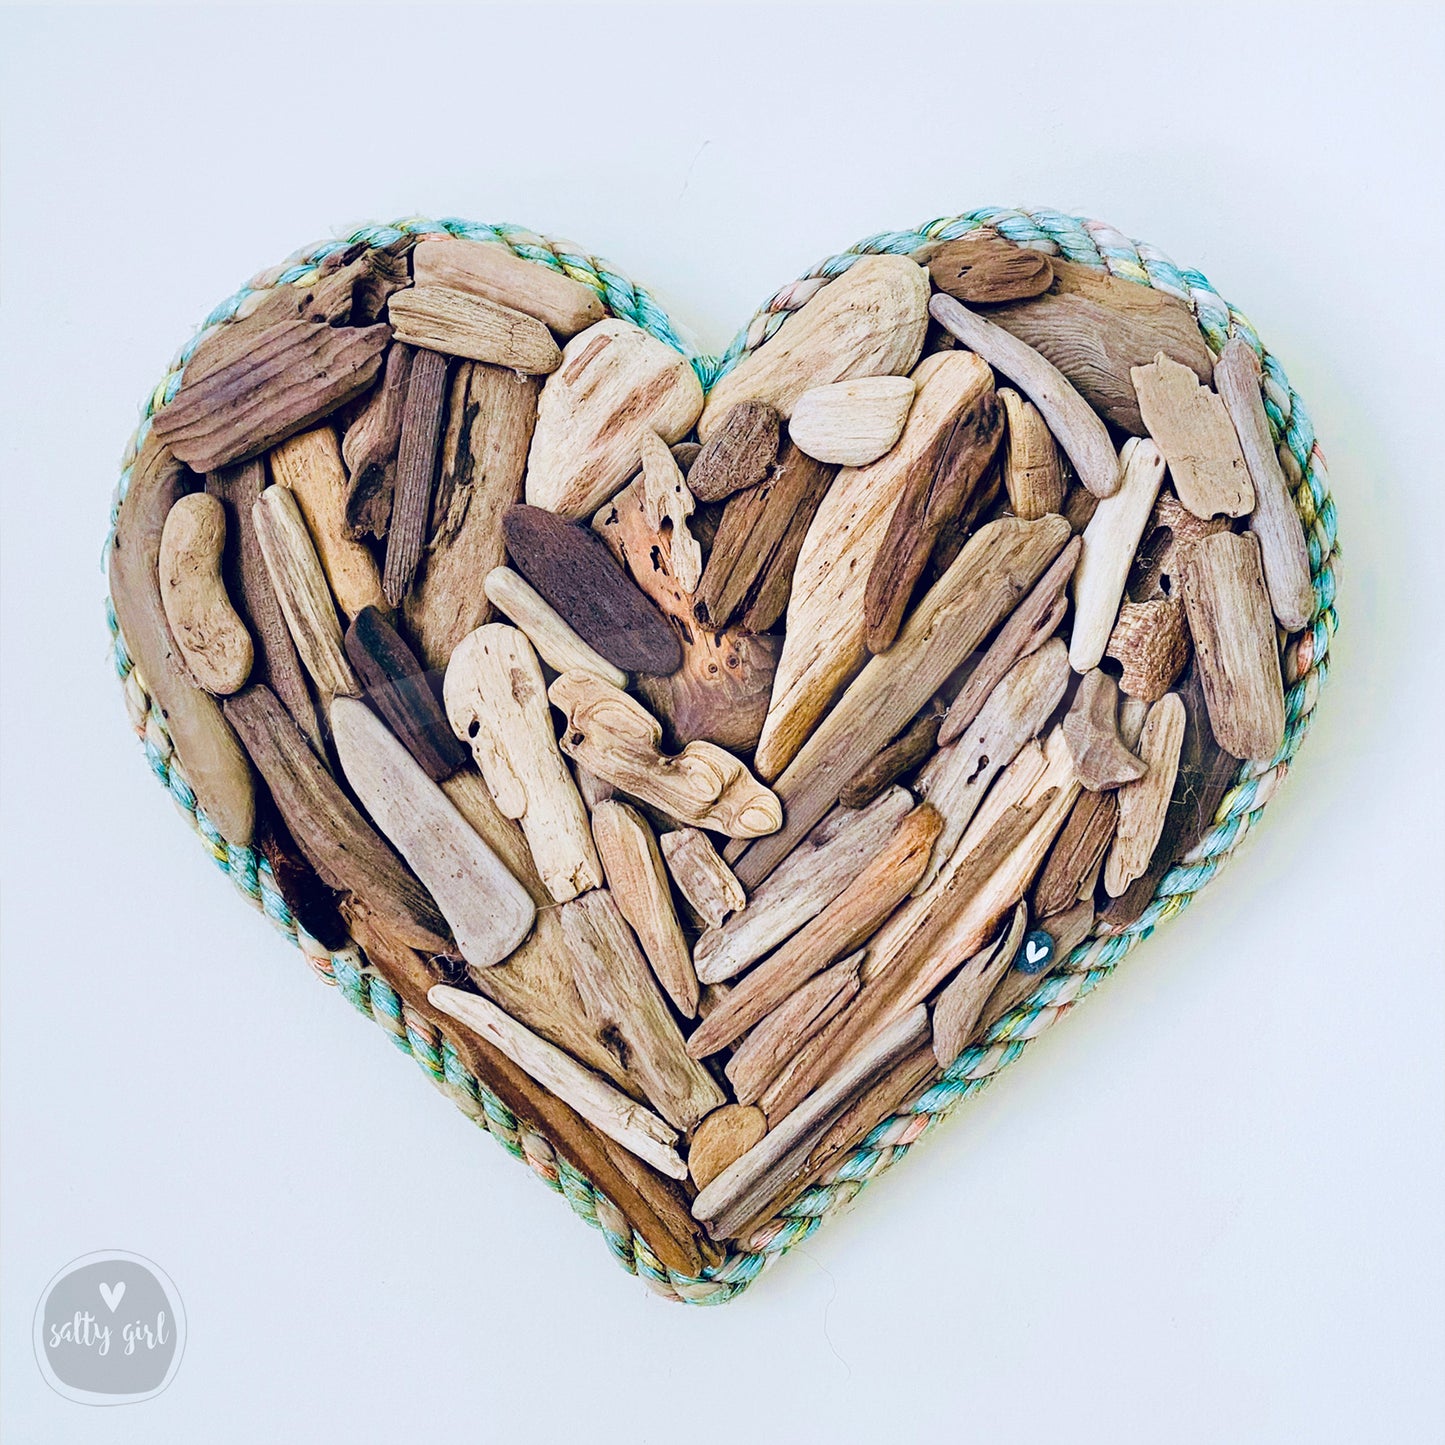 Driftwood Heart Wall Decor with Rope Frame - 14x14" or 20x20"